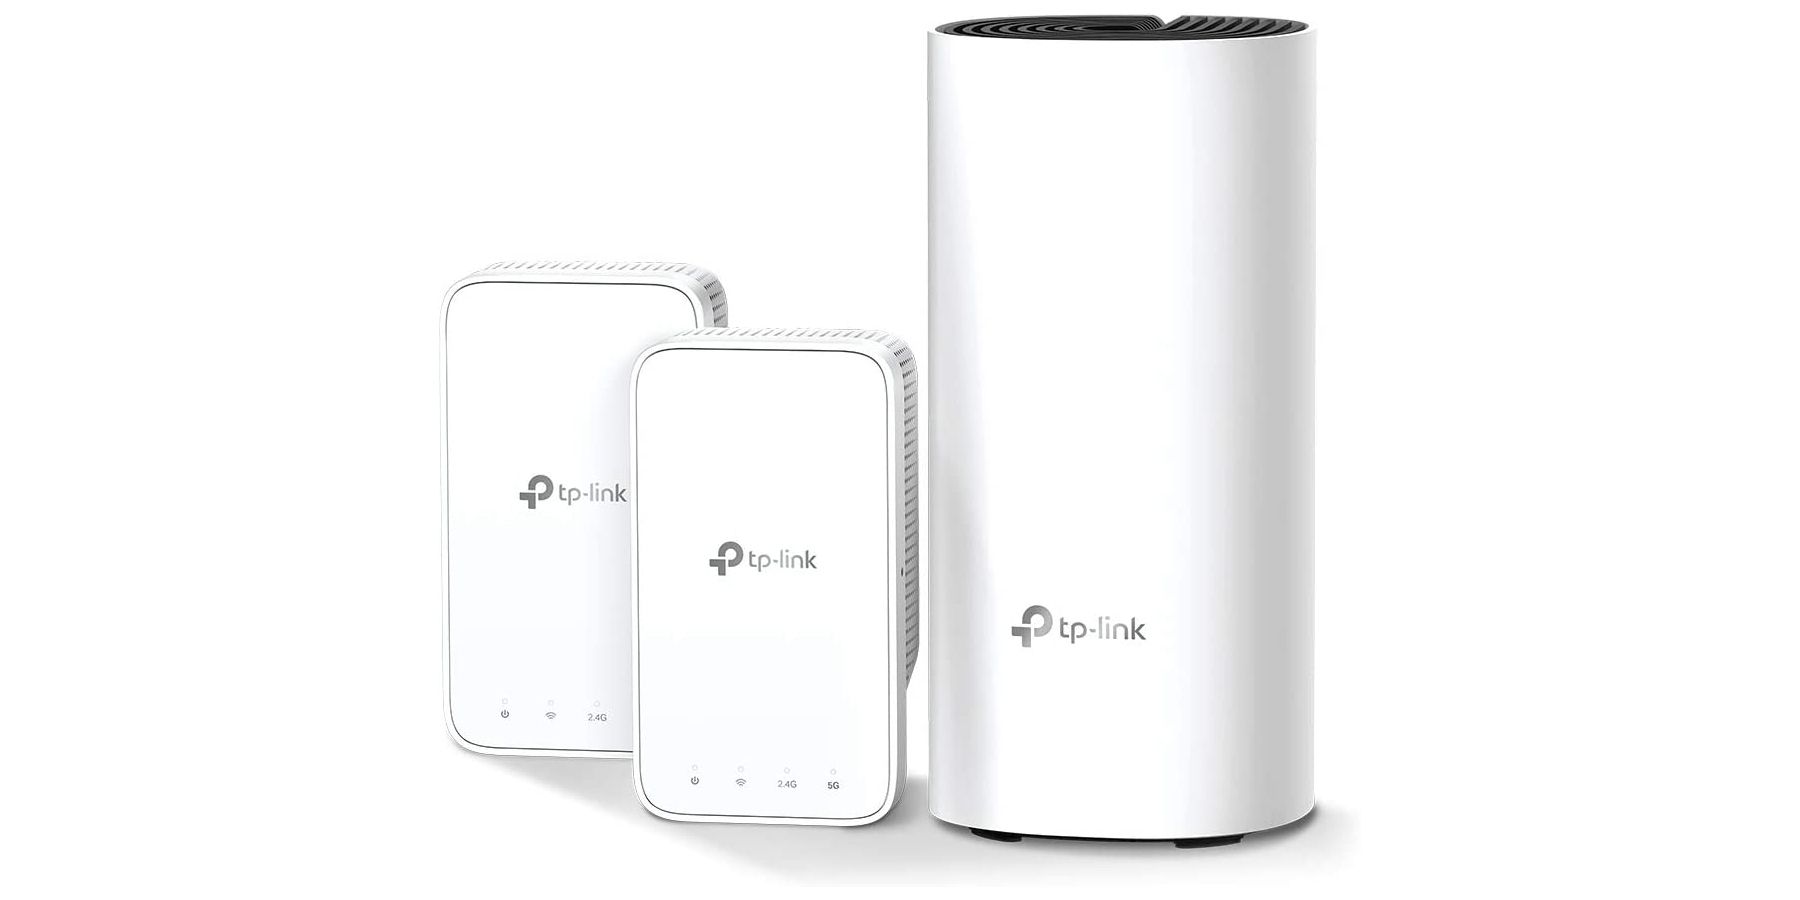 TP-Link Deco Mesh WiFi System(Deco M3) –Up to 4,500 sq.ft Whole Home Coverage, Replaces WiFi Router Extender, Plug-in Design, Works with Alexa, 3-Pack